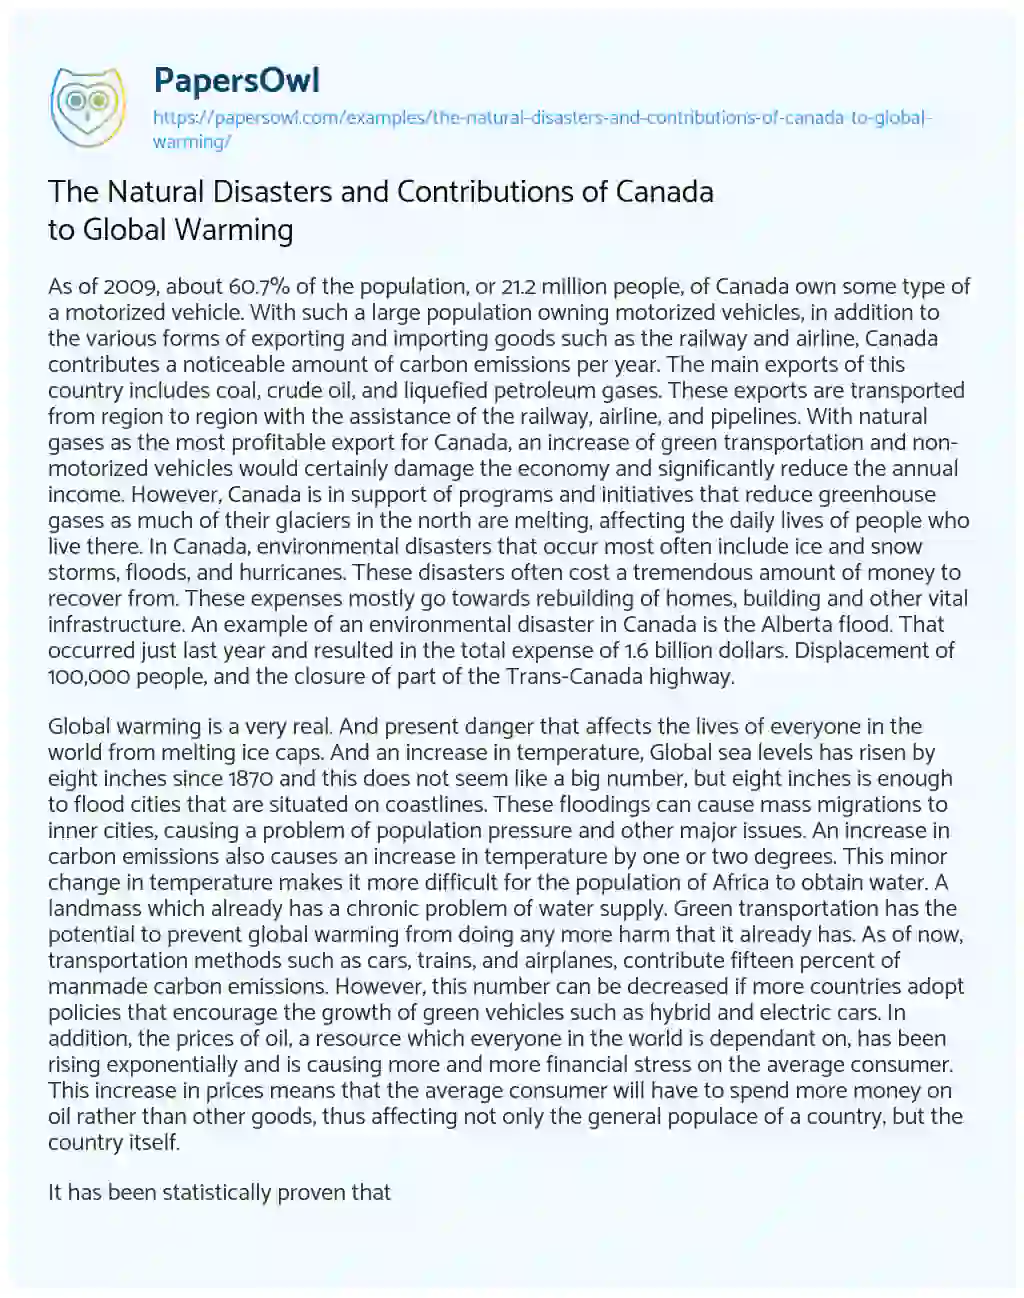 Essay on The Natural Disasters and Contributions of Canada to Global Warming